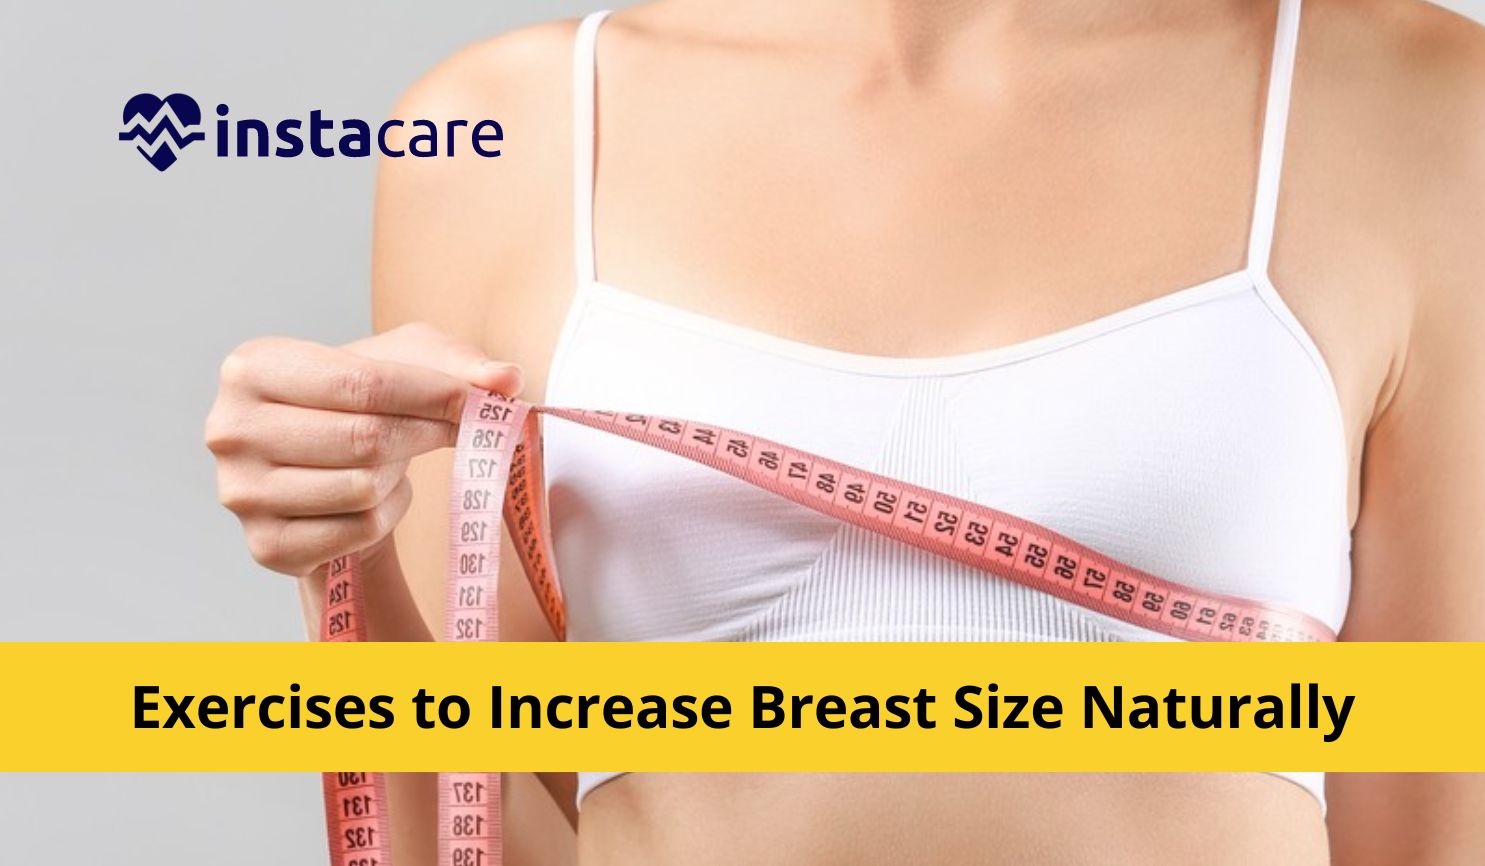 How To Improve Breast Shape Naturally At Home - Simple Tips  Breast growth  tips, Breast workout, How to massage yourself